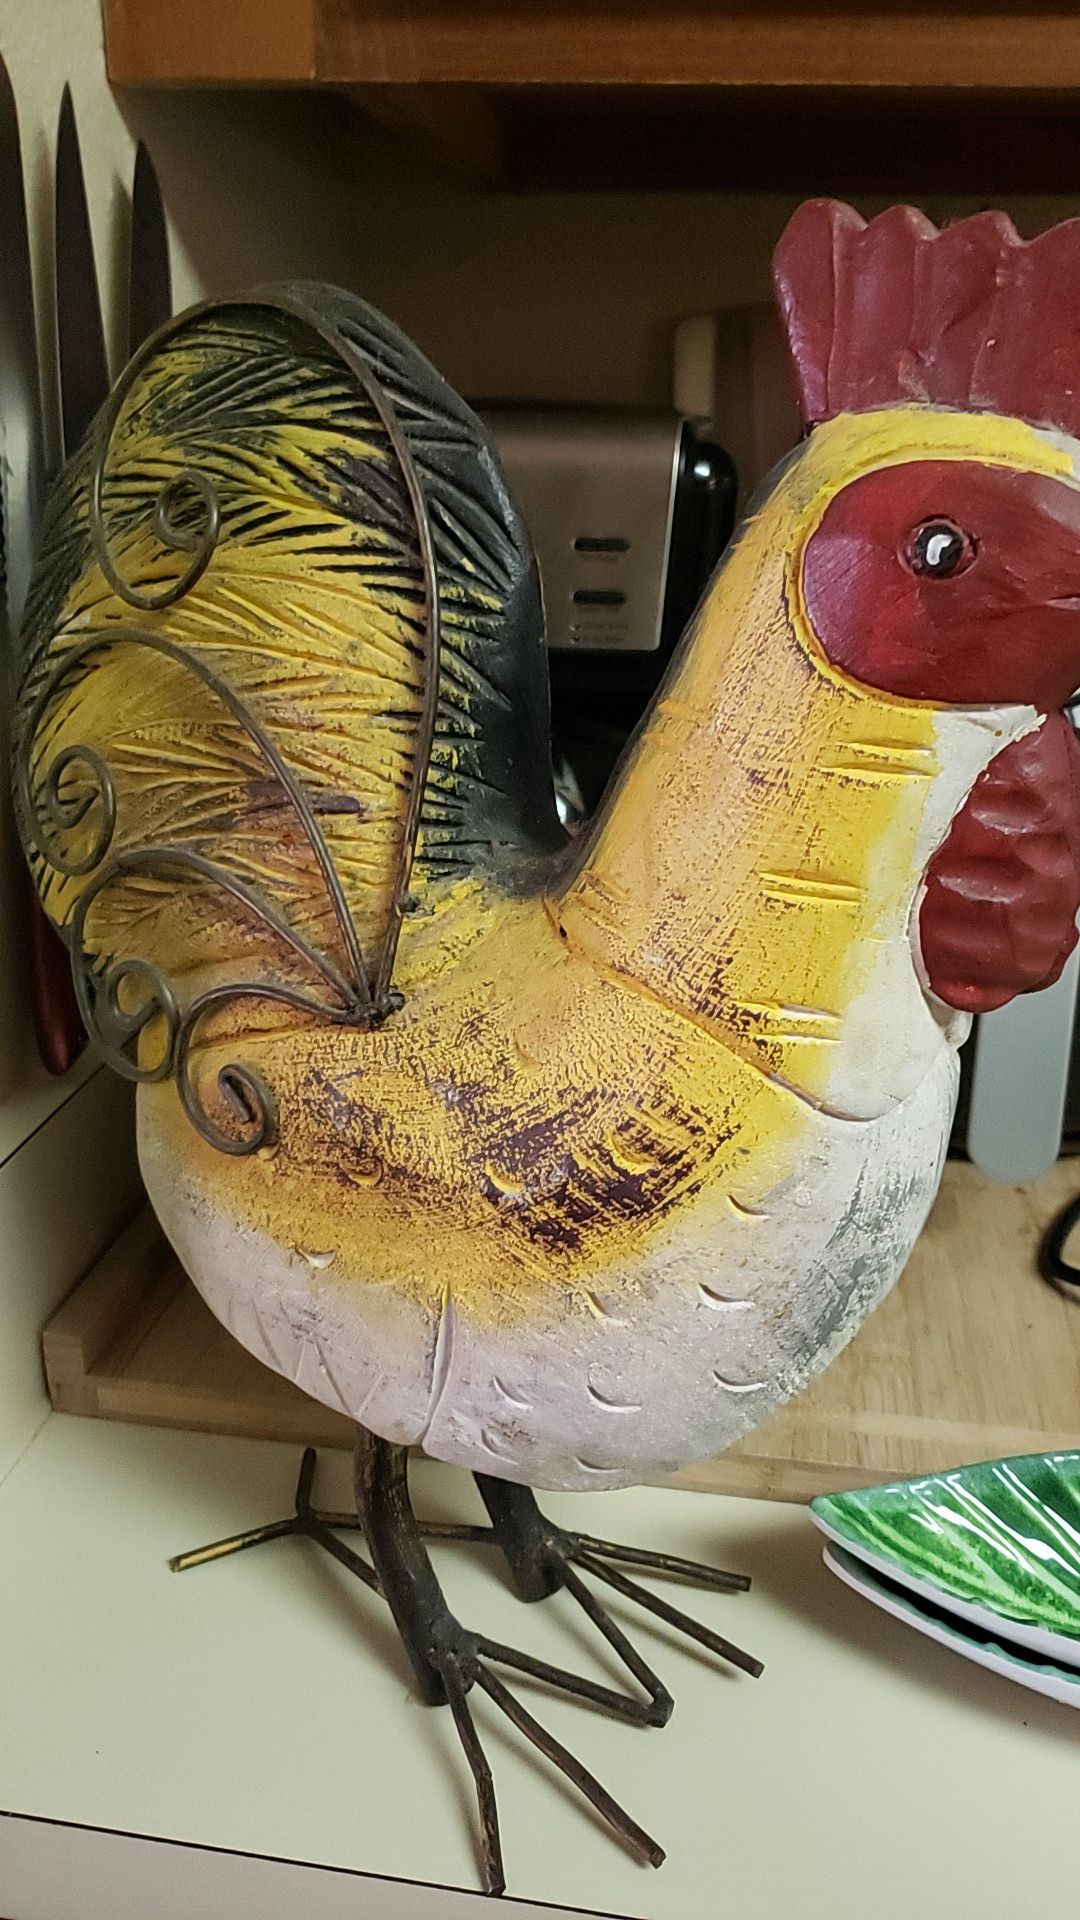 Decorative wooden rooster $10